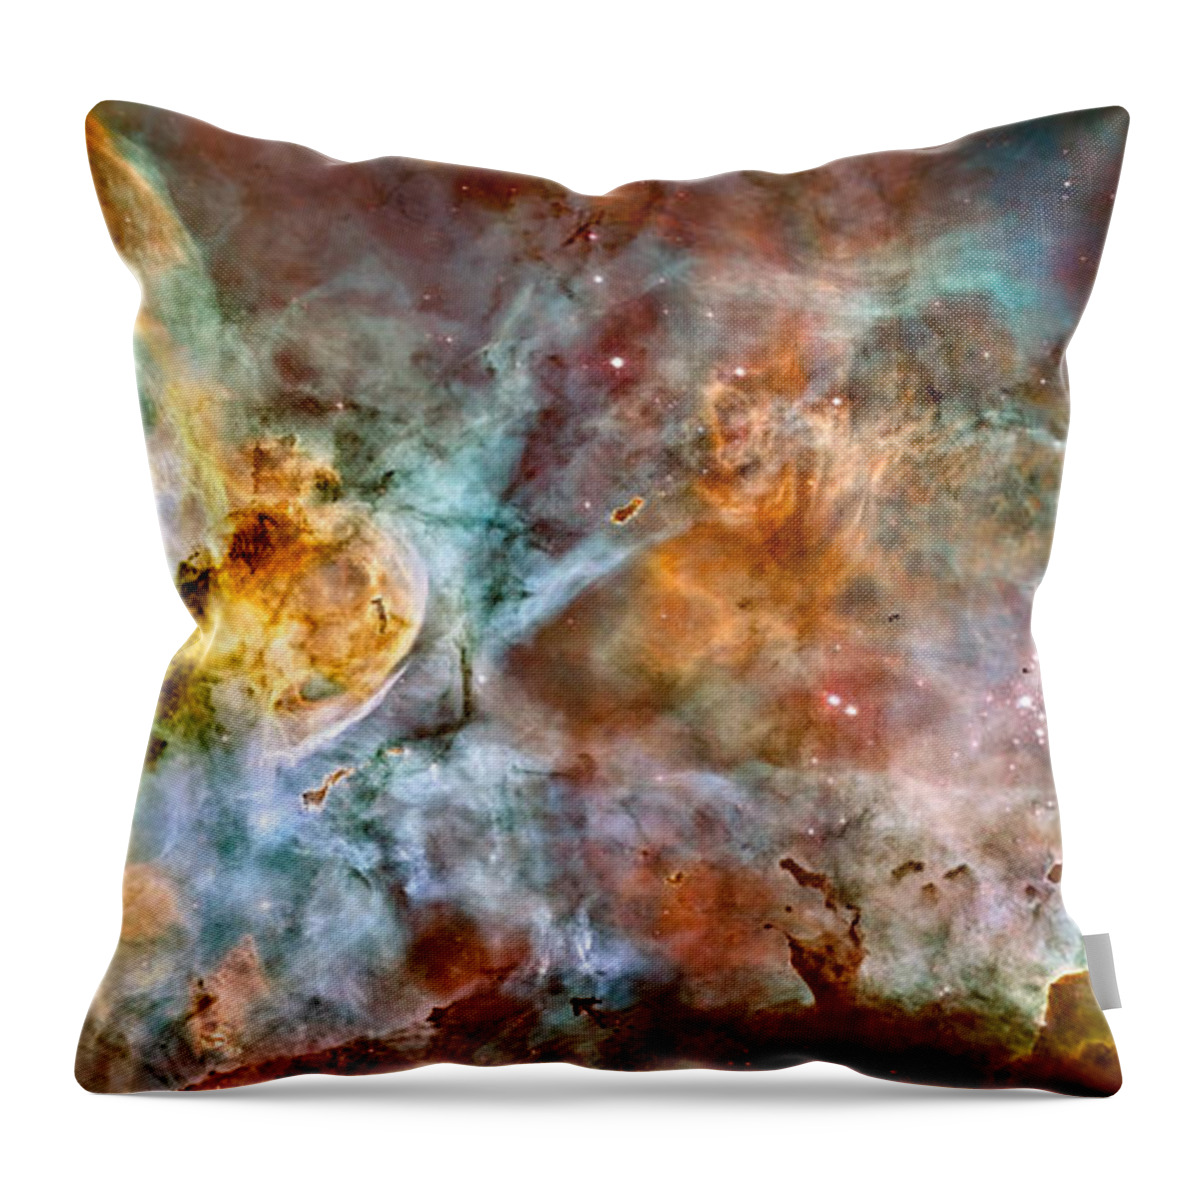 Stars Throw Pillow featuring the photograph The Carina Nebula - Star Birth In The Extreme by Marco Oliveira